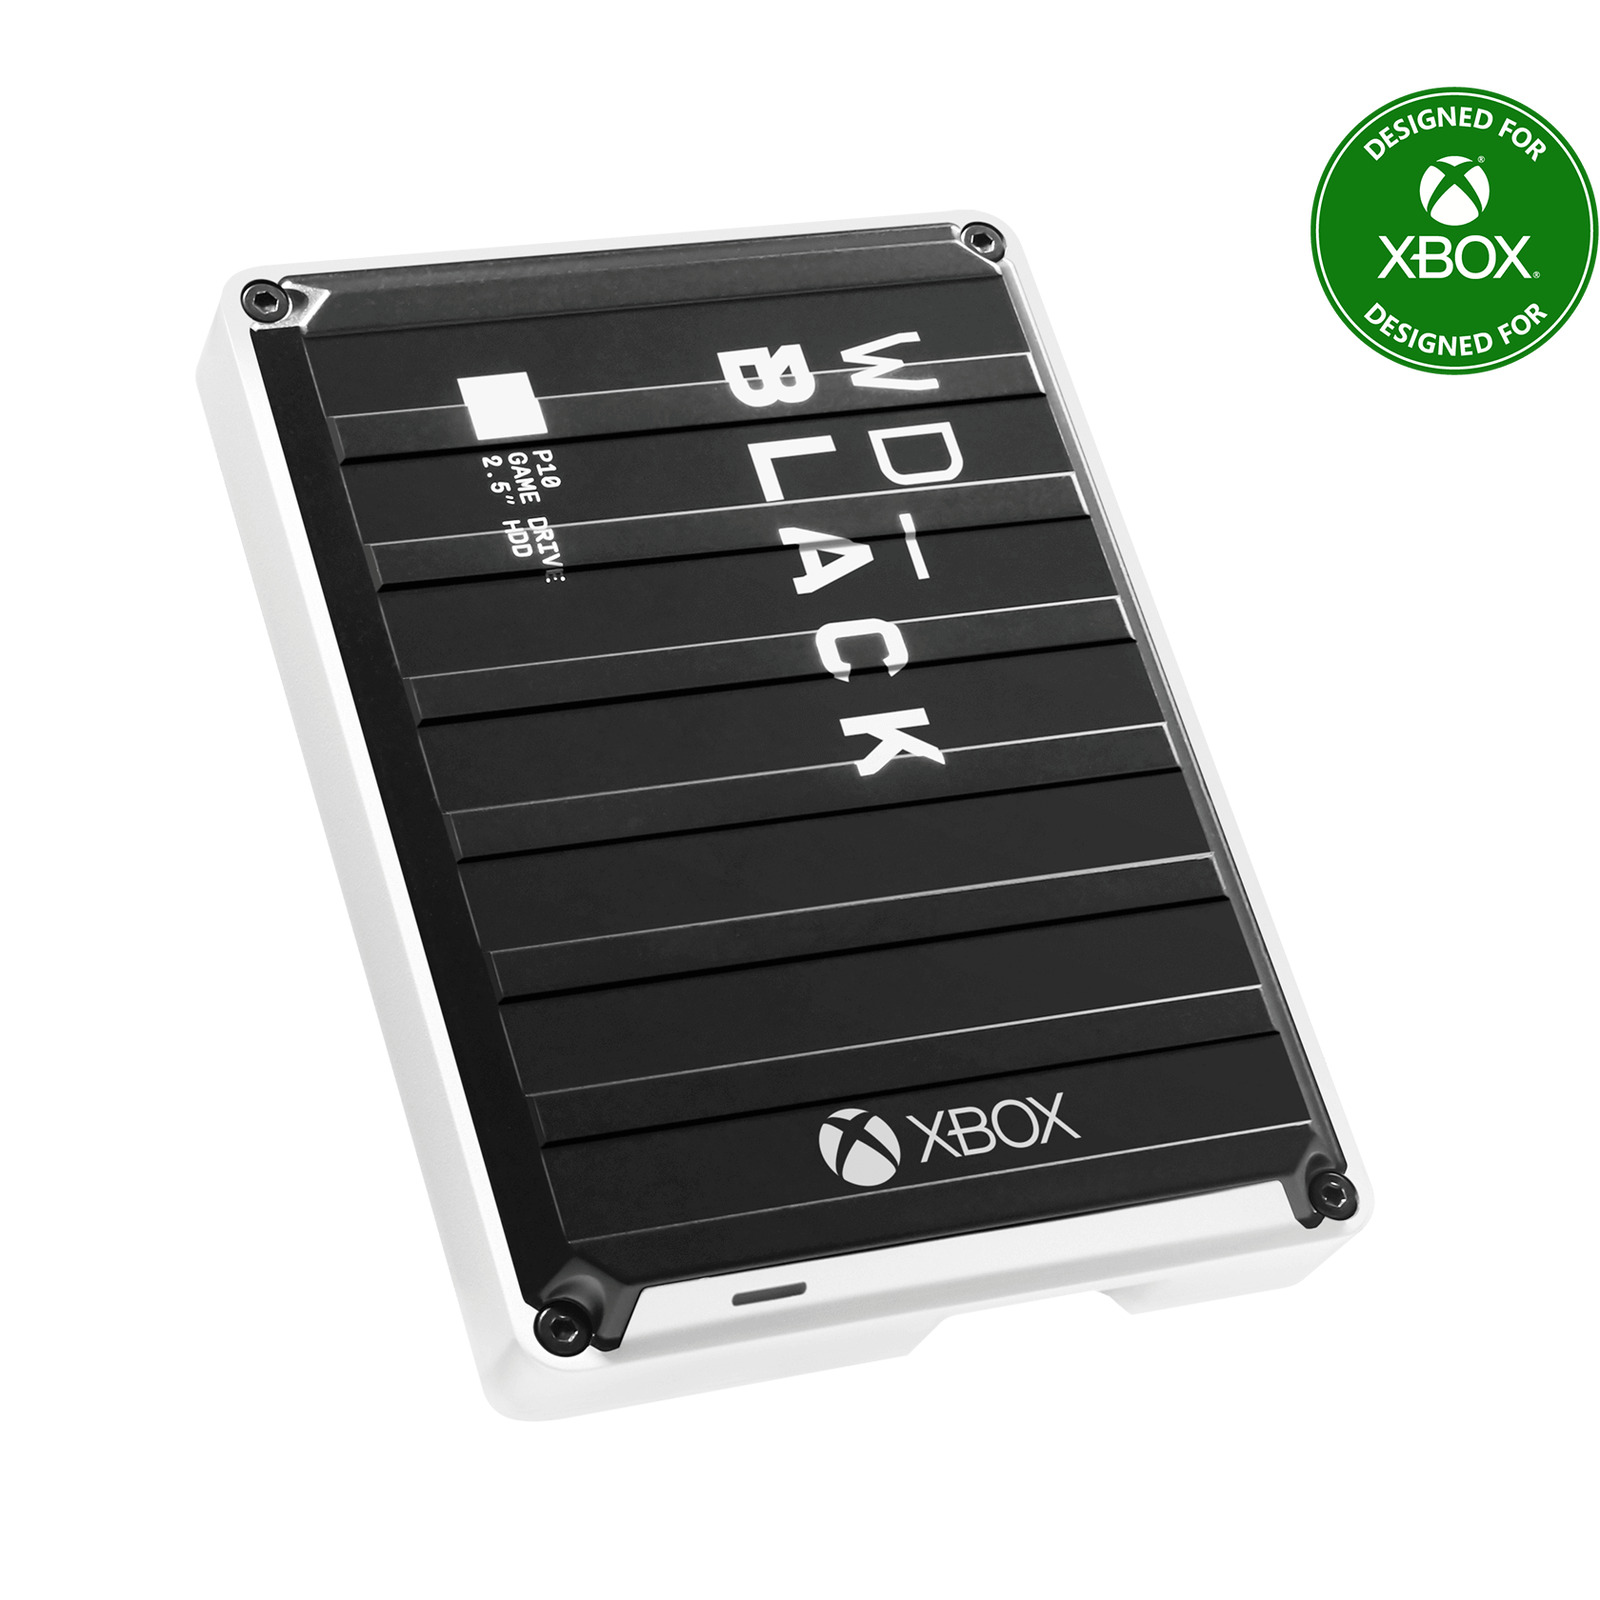 WD_BLACK 5TB P10 Game Drive for Xbox, Certified Refurbished Portable External...